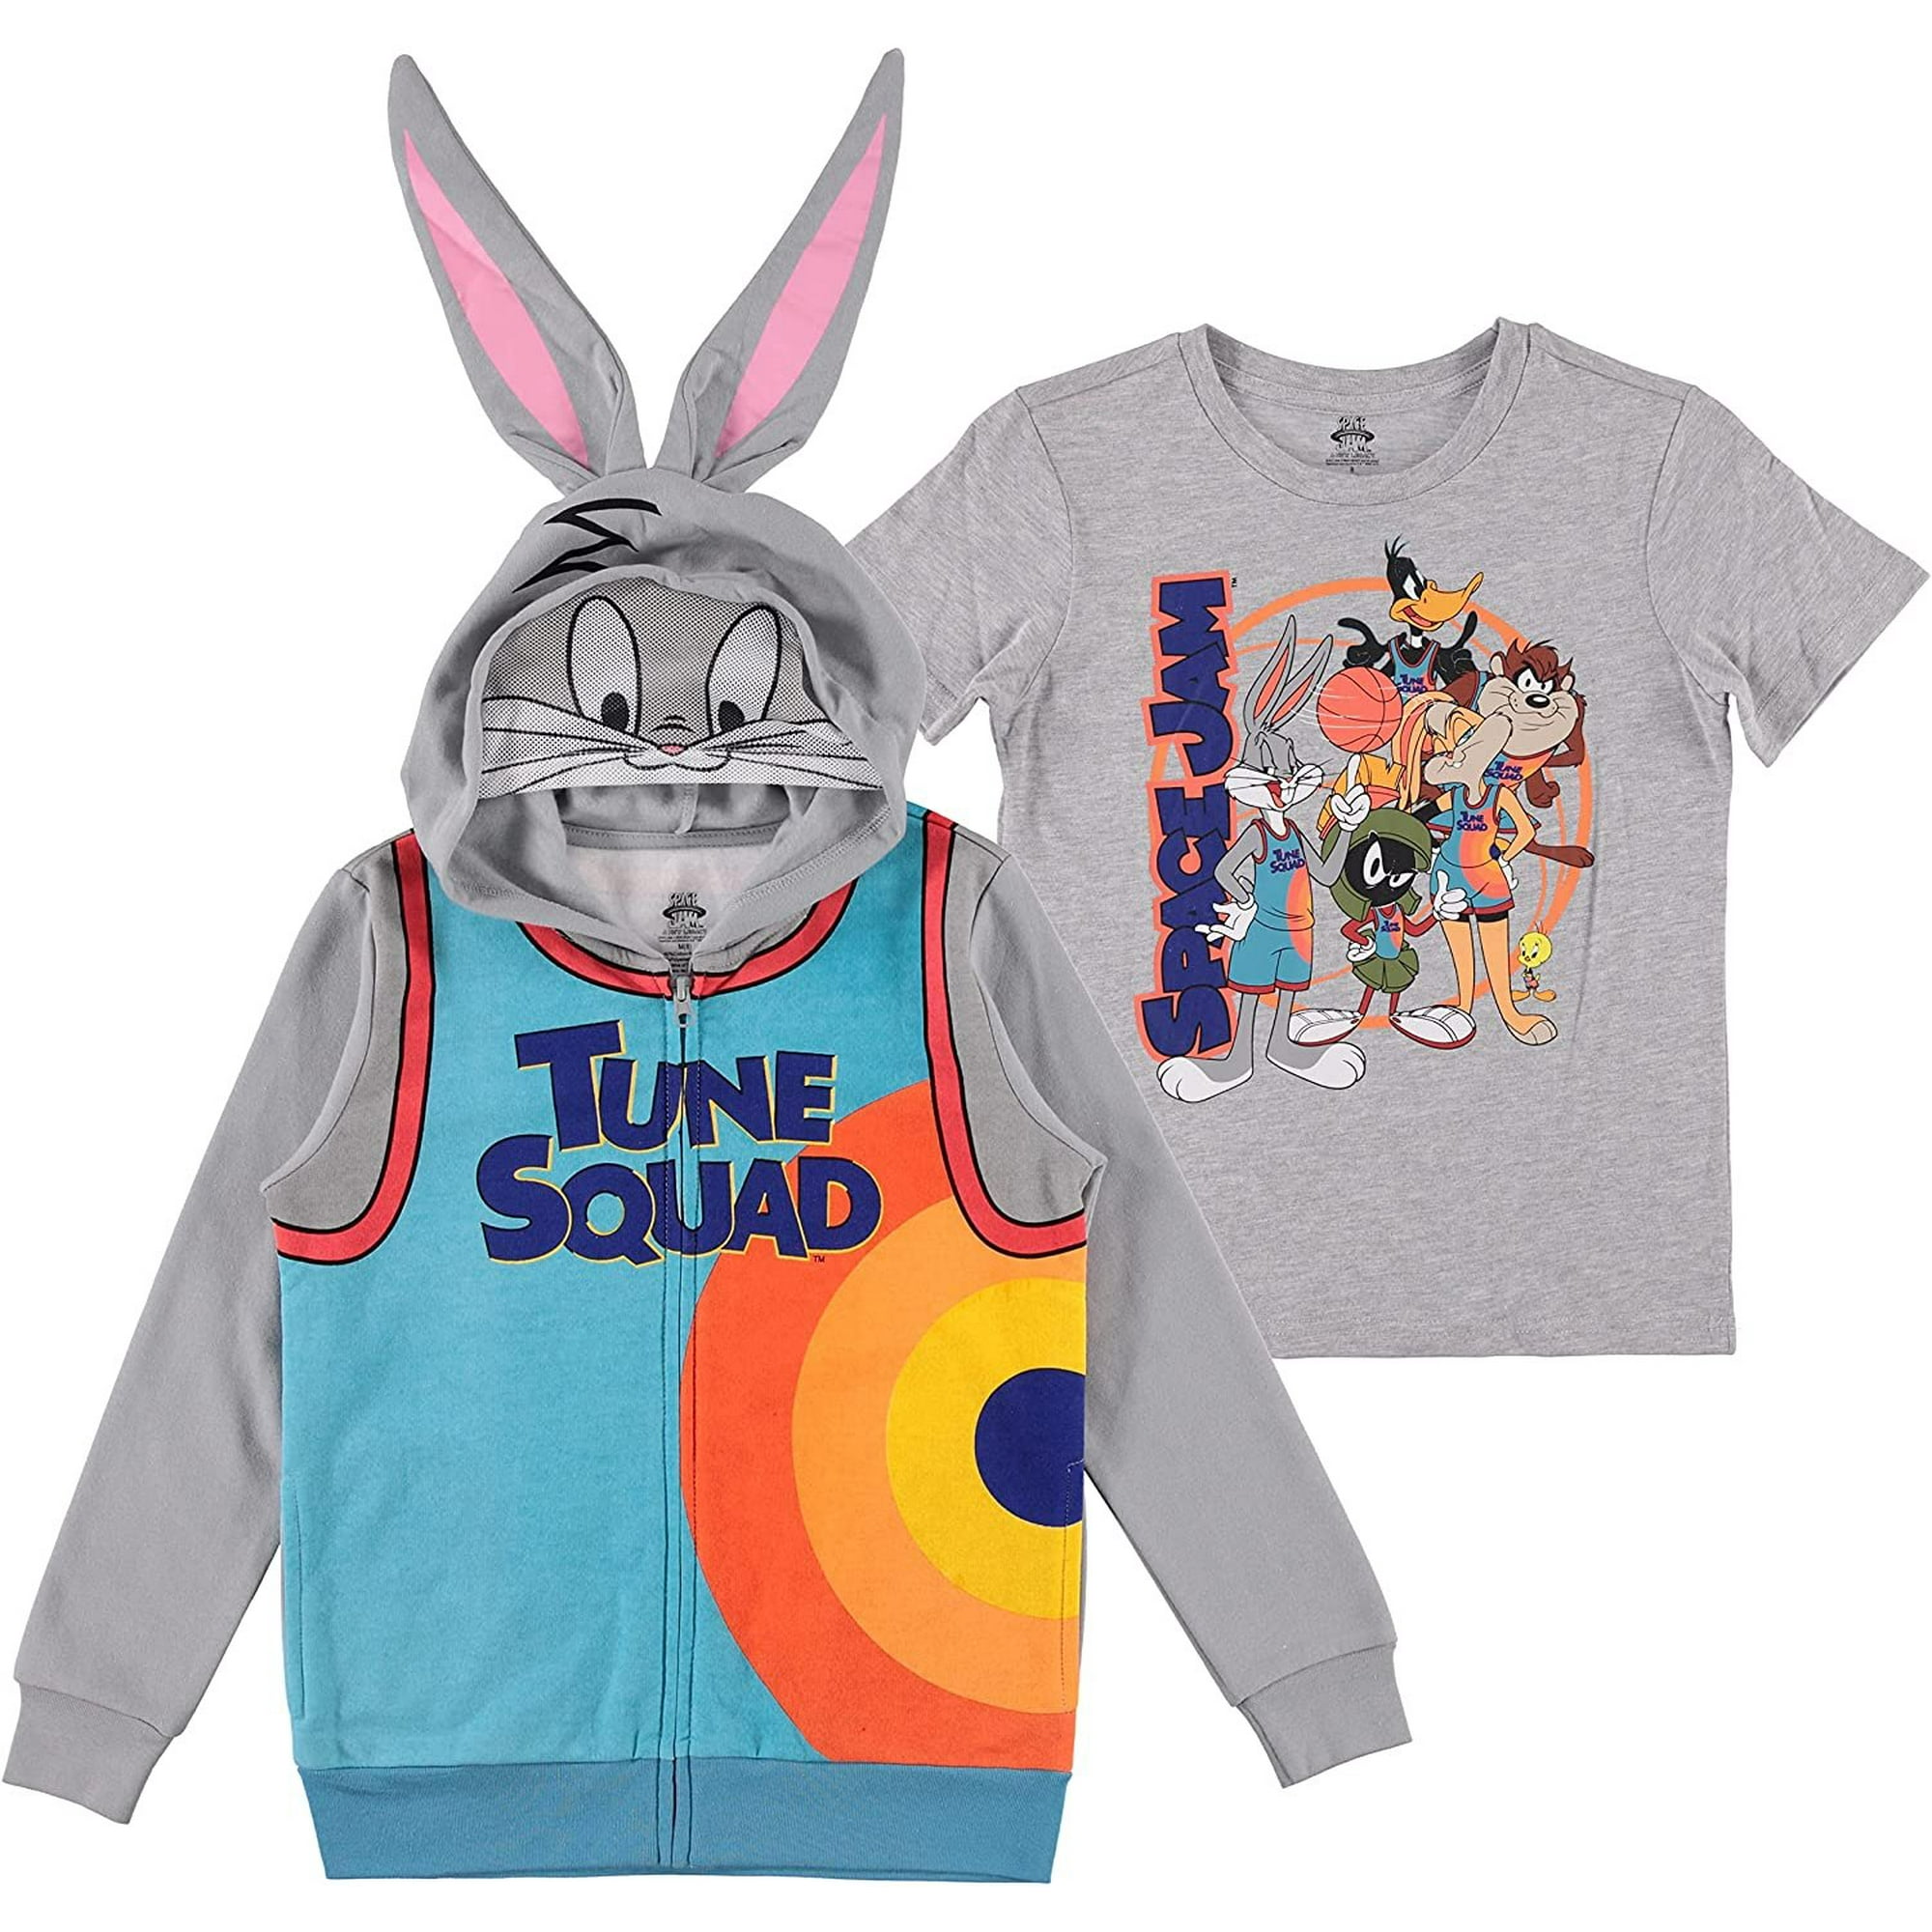 Freeze Boys' Space Jam Hoodie and T-Shirt Clothing Set - Bugs Bunny Tune Squad Hoodie Sizes 4-18, Boy's